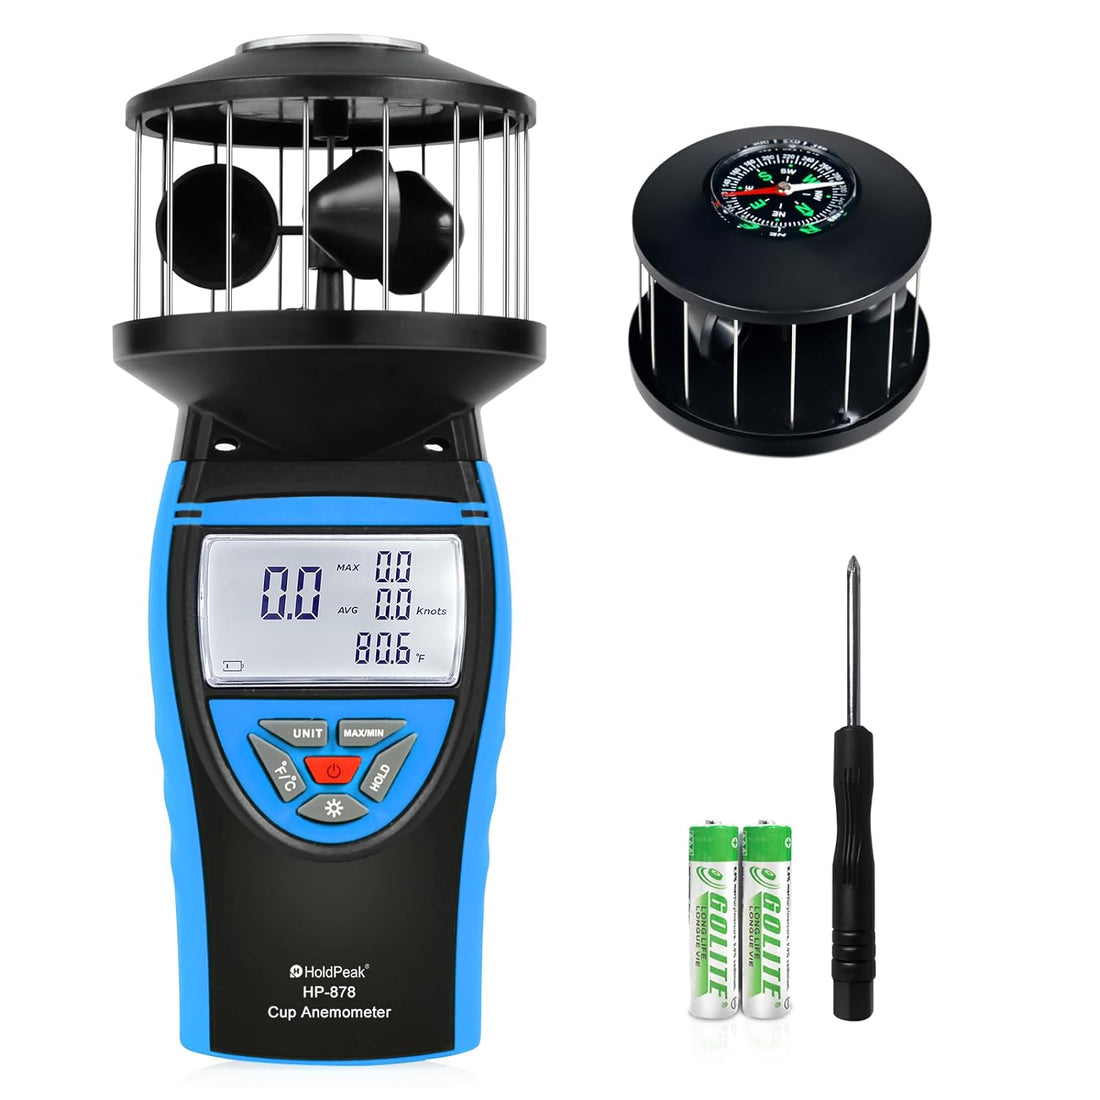 Digital Anemometer with Compass, HOLDPEAK HP-878 Cup Wind Speed Meter for Outdoor with 360° Wind Measuring, 0.7-42m/s High Accuracy Handheld Wind Gauge, LED Display, MAX/MIN, Auto Shut Down, ℃/℉